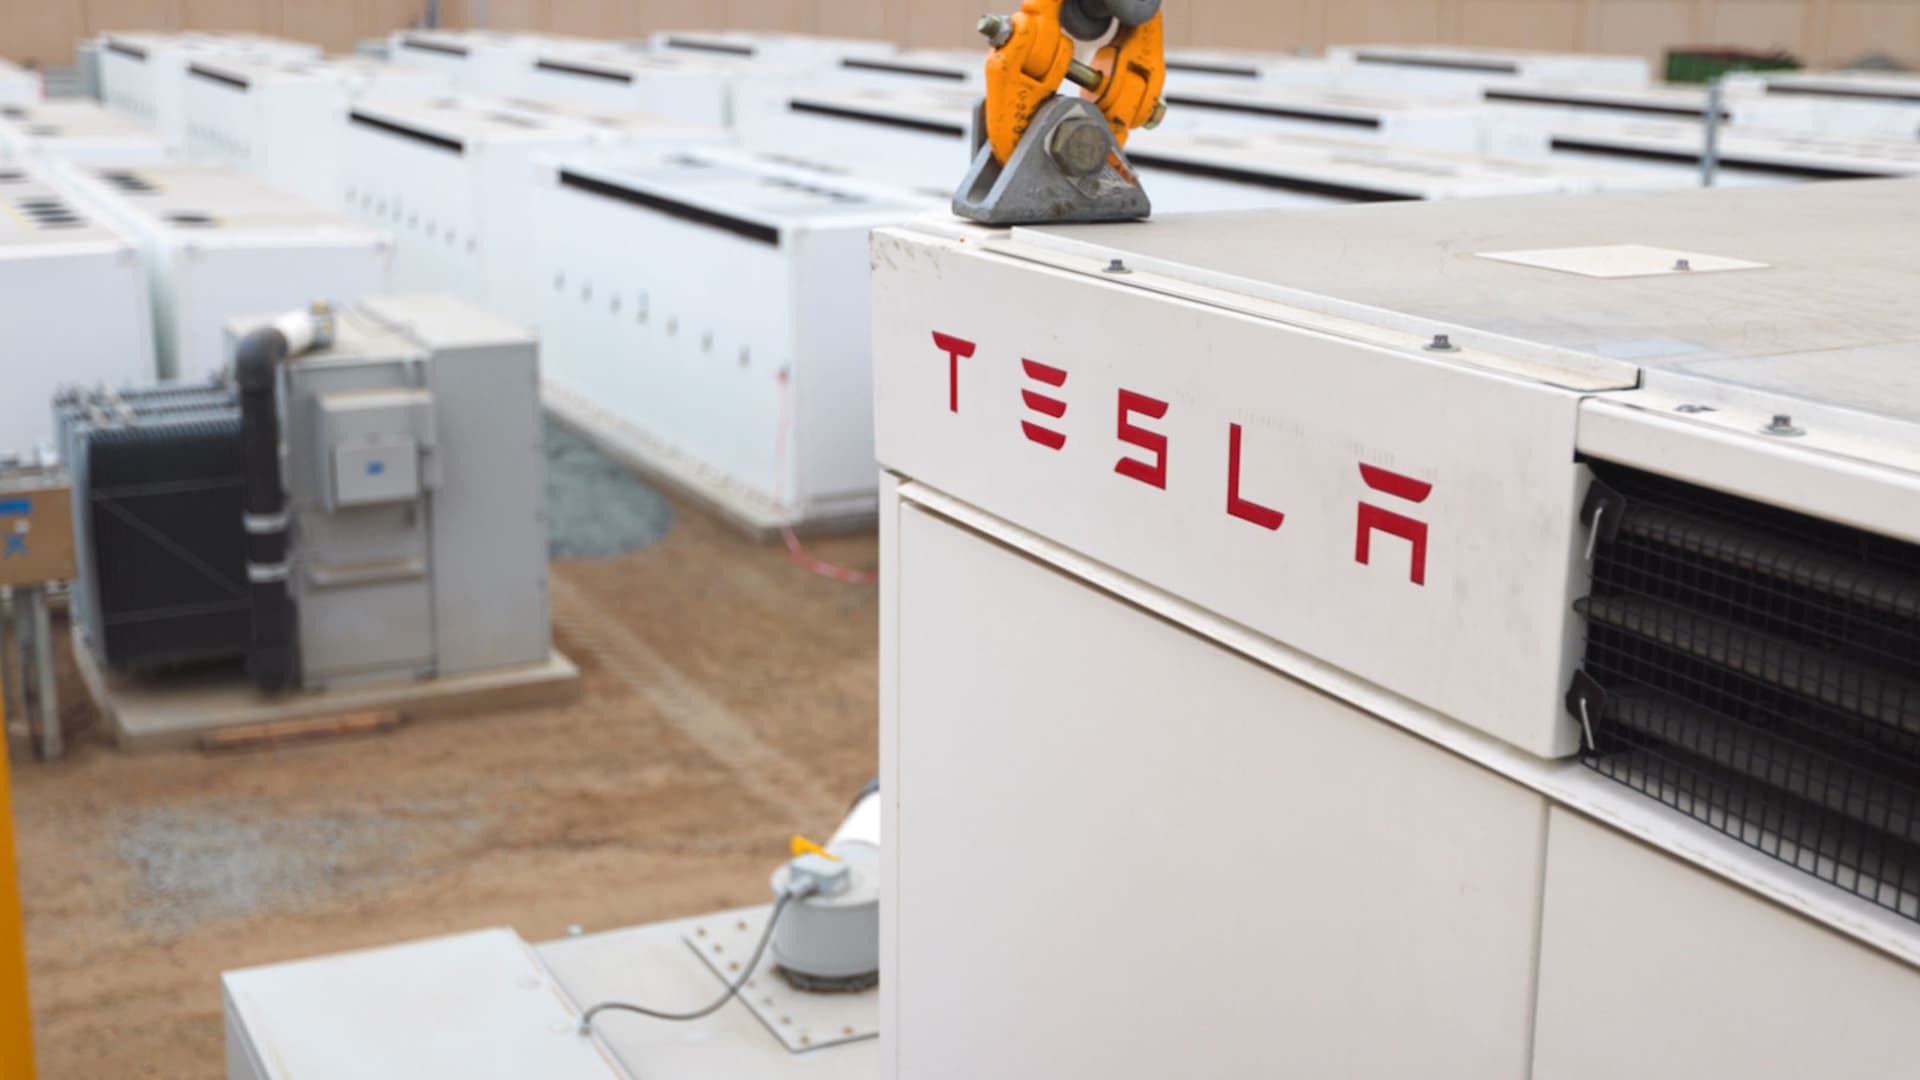 Tesla Megapack battery caught fire at PG&E substation in California